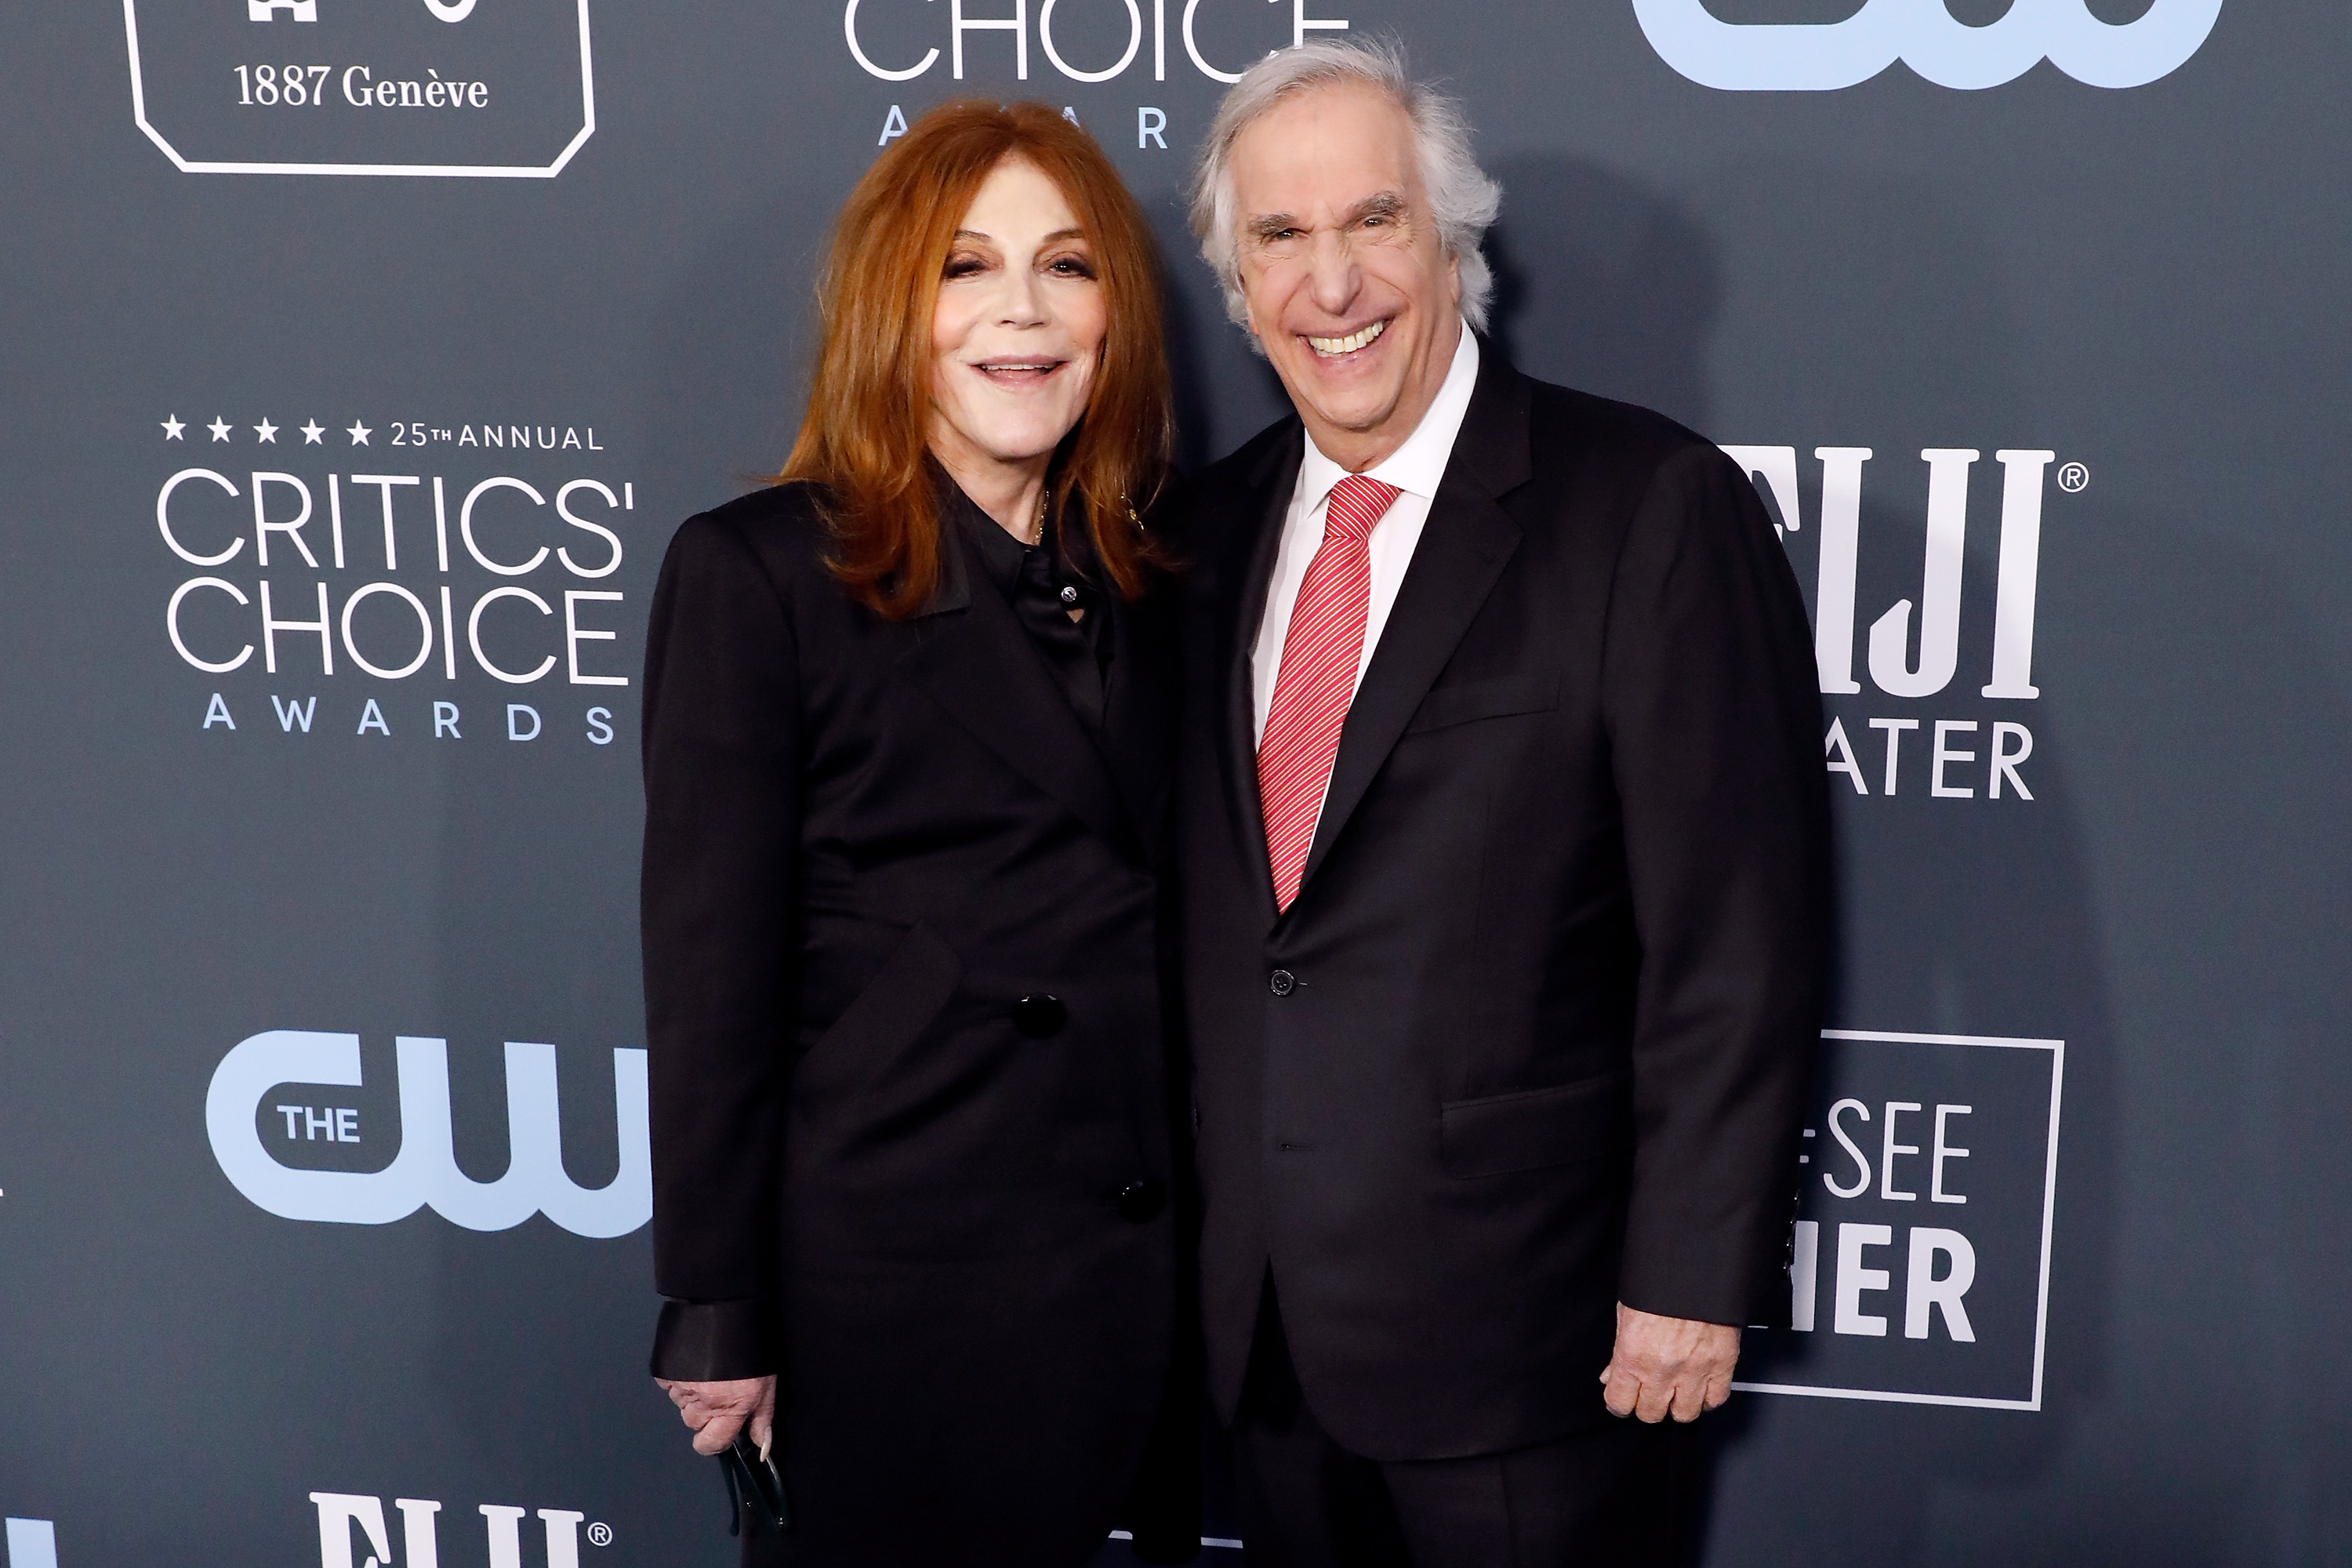 Stacey Weitzman and Henry Winkler at the 25th Annual Critics' Choice Awards in Santa Monica, California on January 12, 2020 | Source: Getty Images